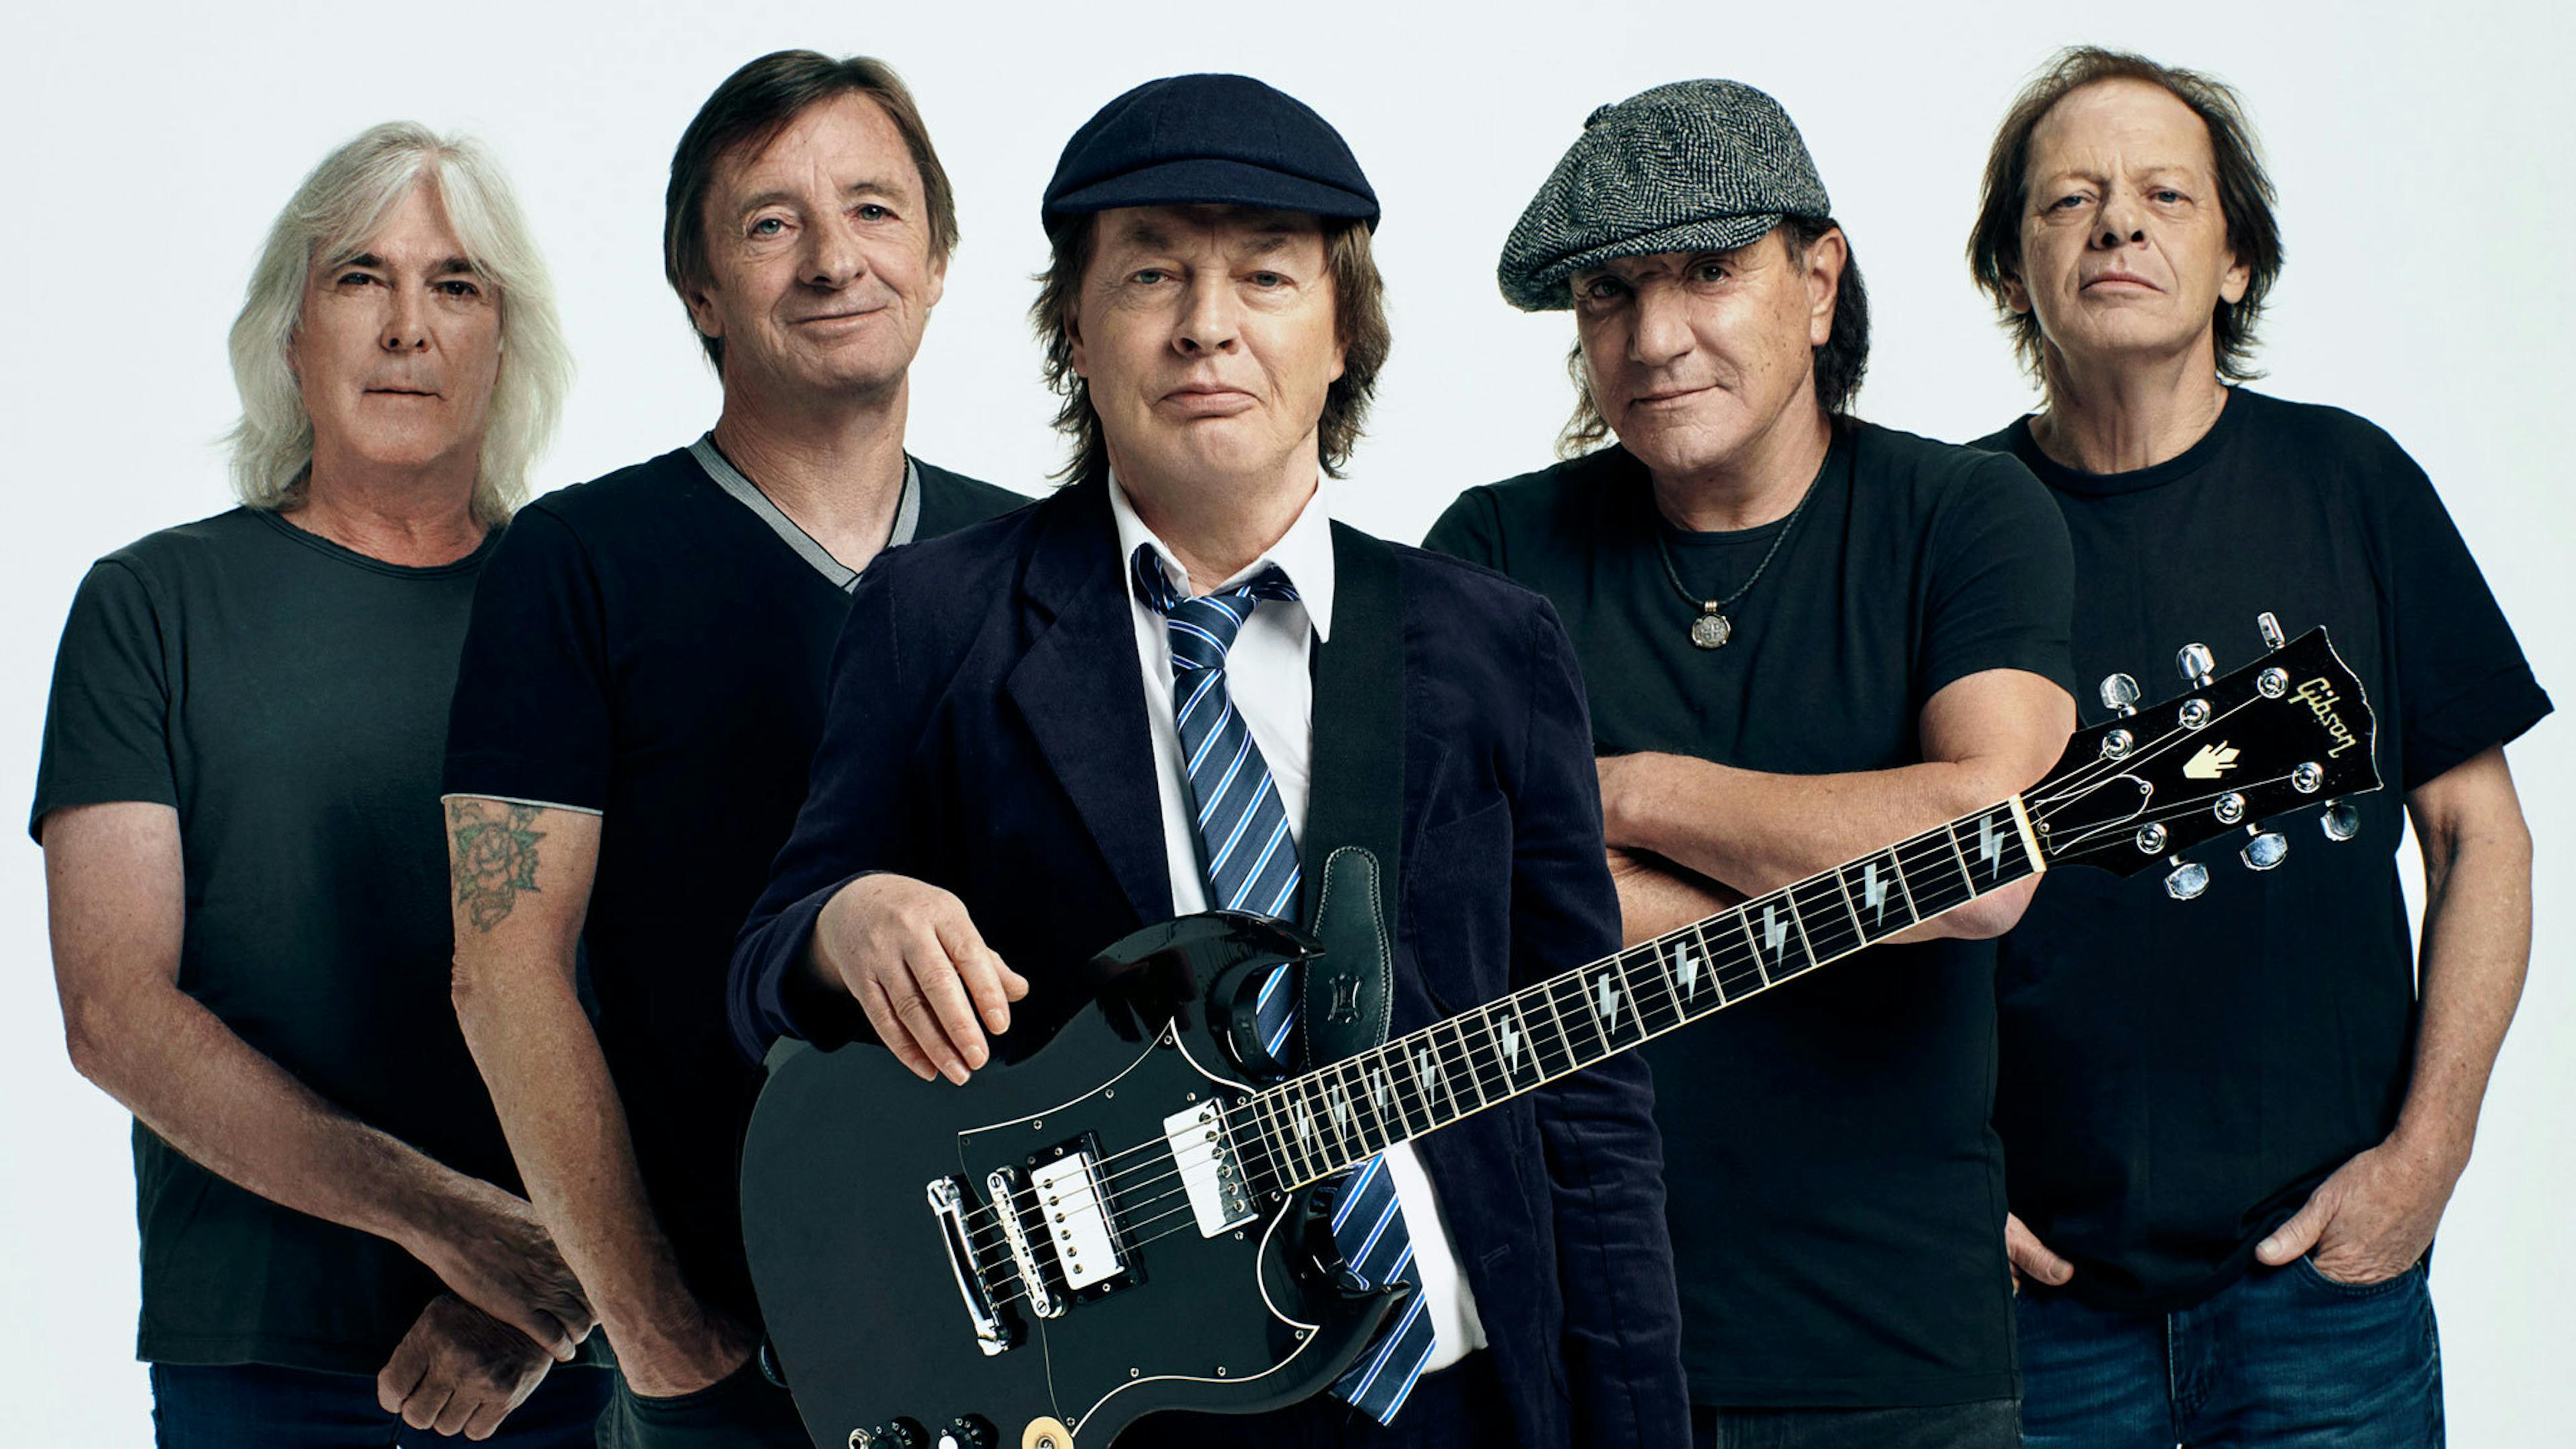 AC/DC Offer New Song, Realize, Ahead of Next Album Release